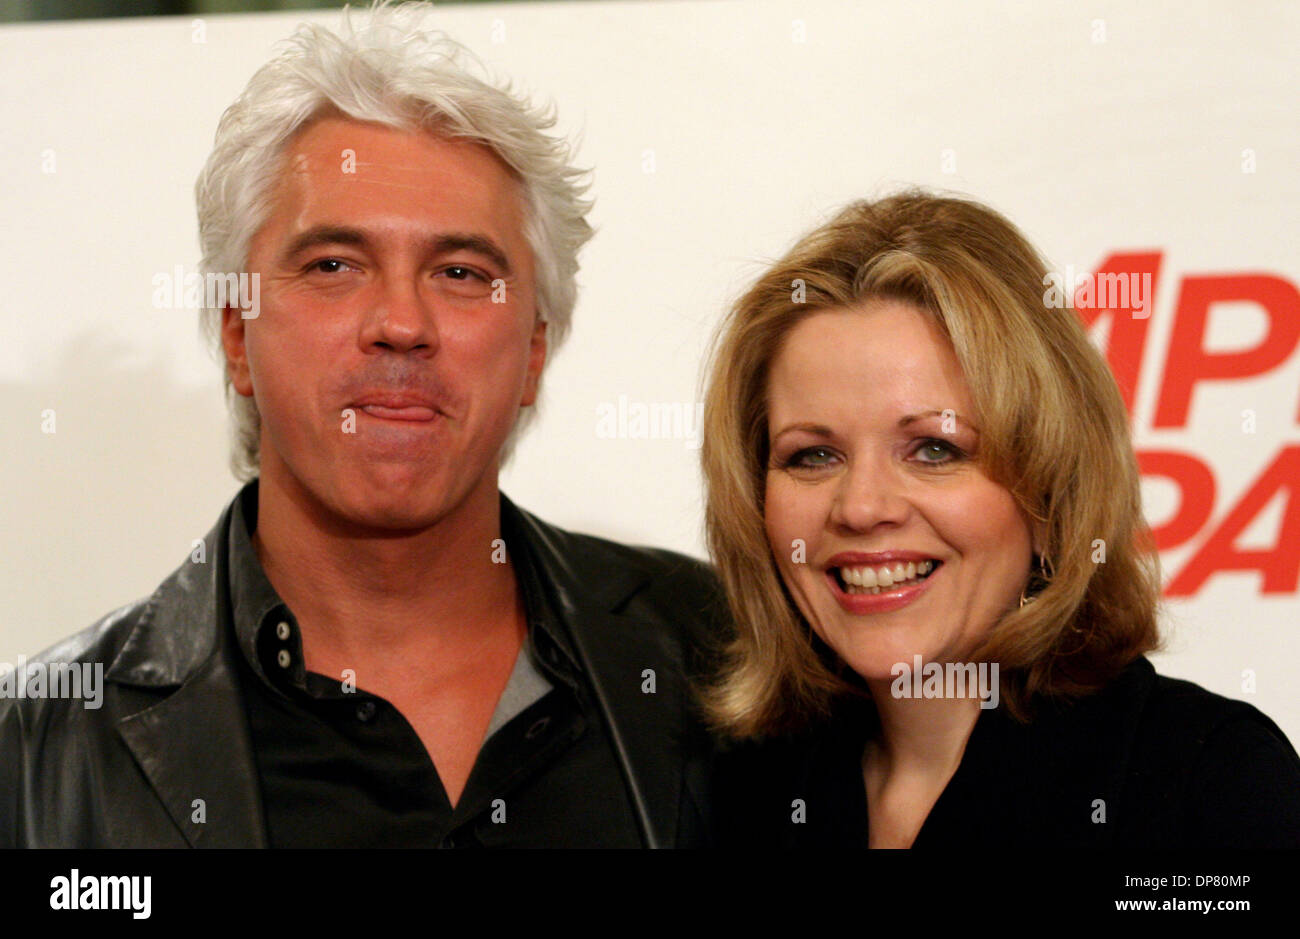 Russian opera star Dmitry Khvorostovsky and american opera diva Renee in the concert in Moscow.(Credit Image: © PhotoXpress/ZUMA Press) RESTRICTIONS: North and South America Rights ONLY! Stock Photo - Alamy